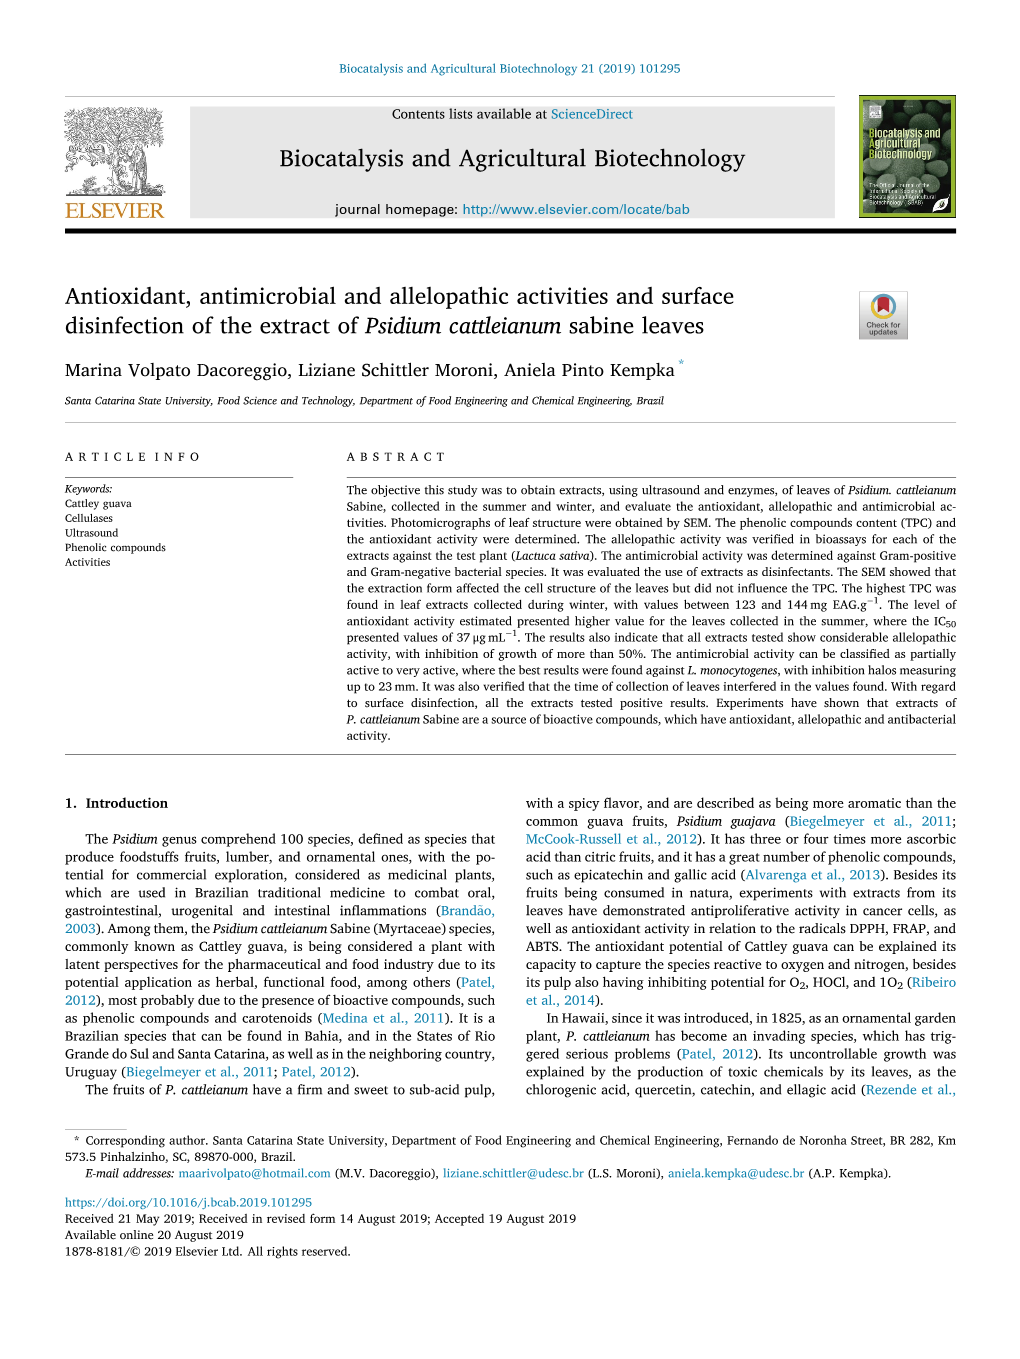 Antioxidant, Antimicrobial and Allelopathic Activities and Surface Disinfection of the Extract of Psidium Cattleianum Sabine Leaves